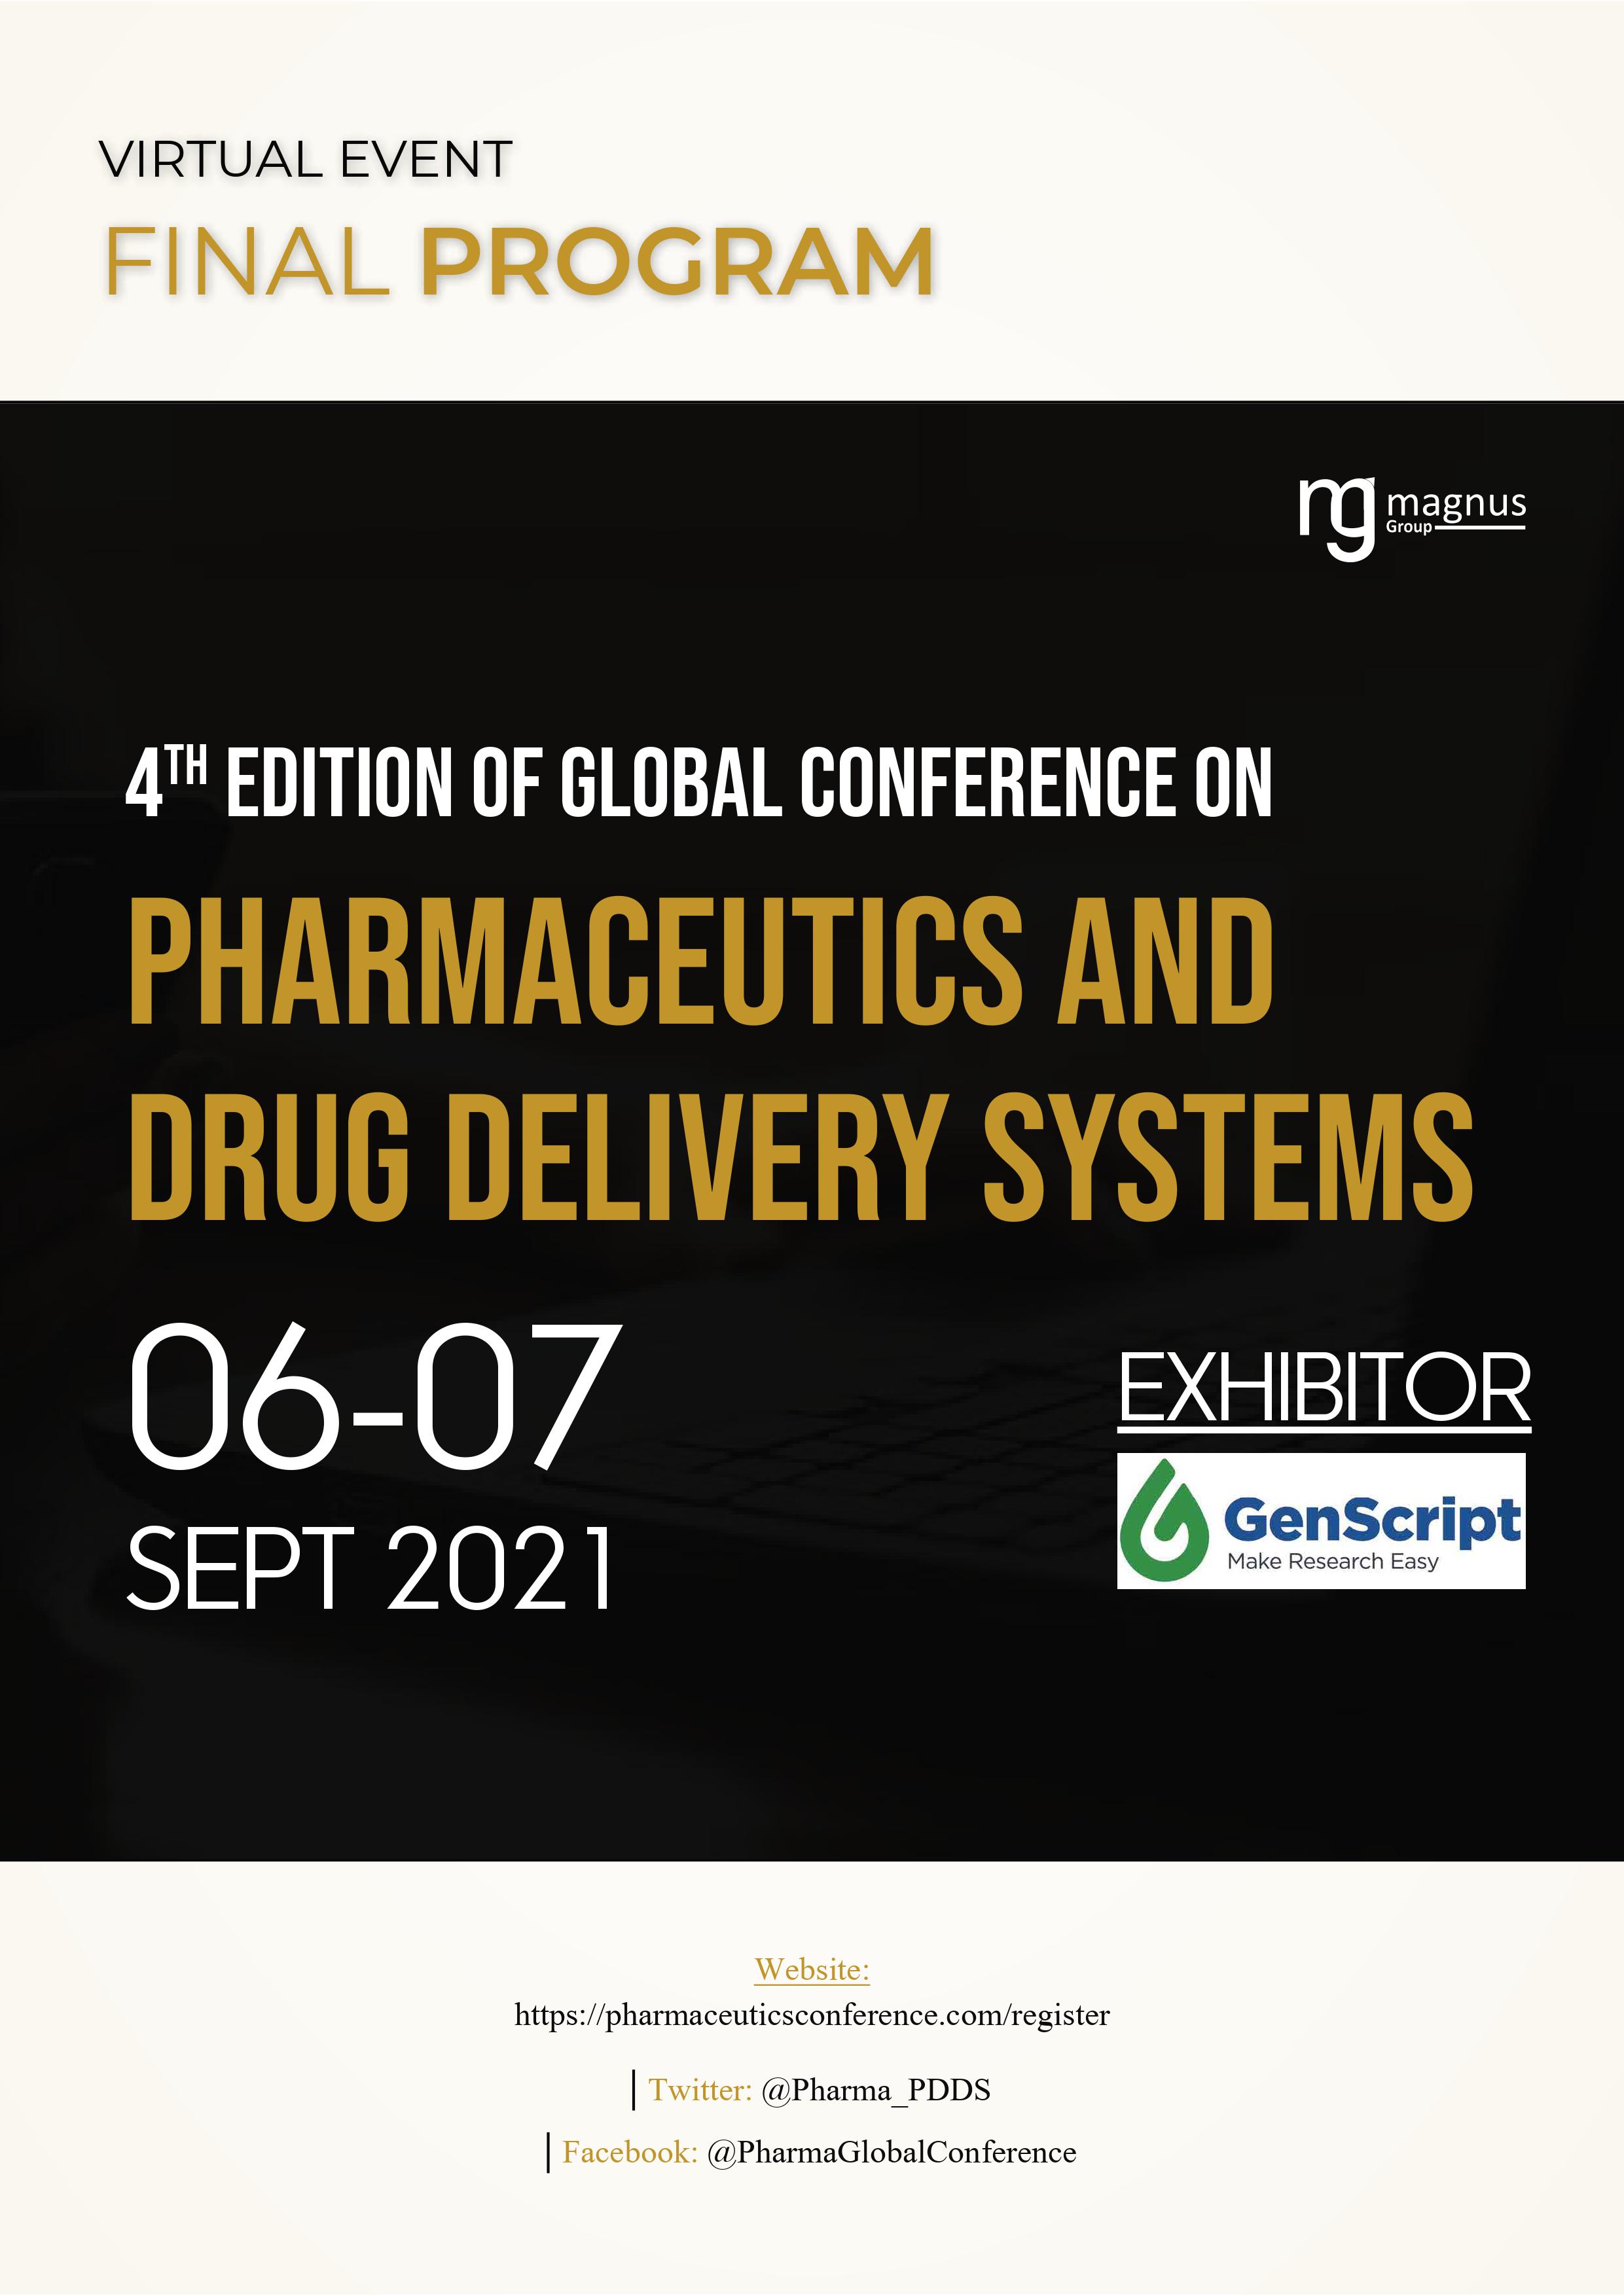 Pharmaceutics and Drug Delivery Systems | Rome, Italy Program